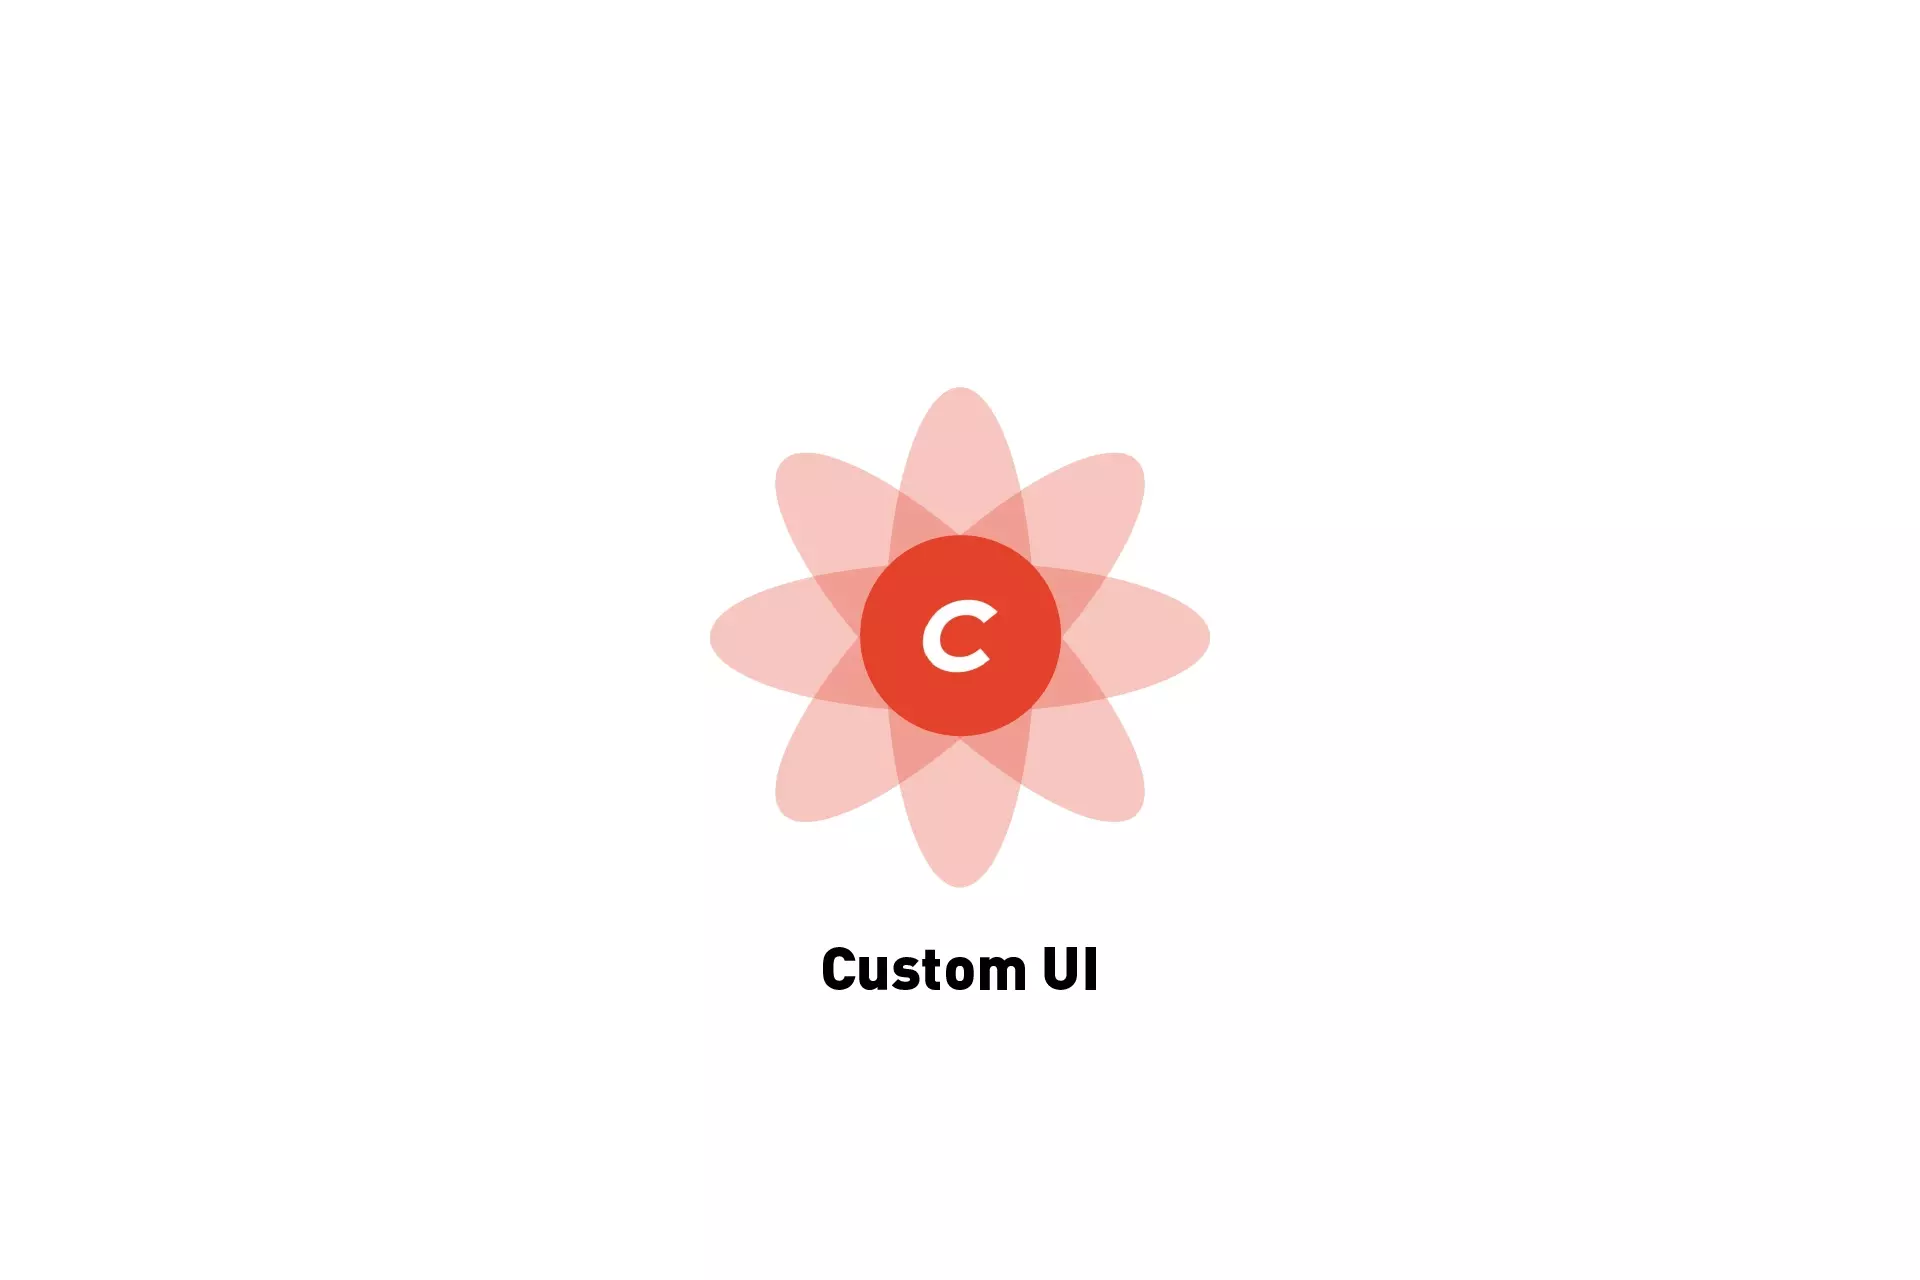 A flower that represents Craft CMS, beneath it sits the text "Custom UI."